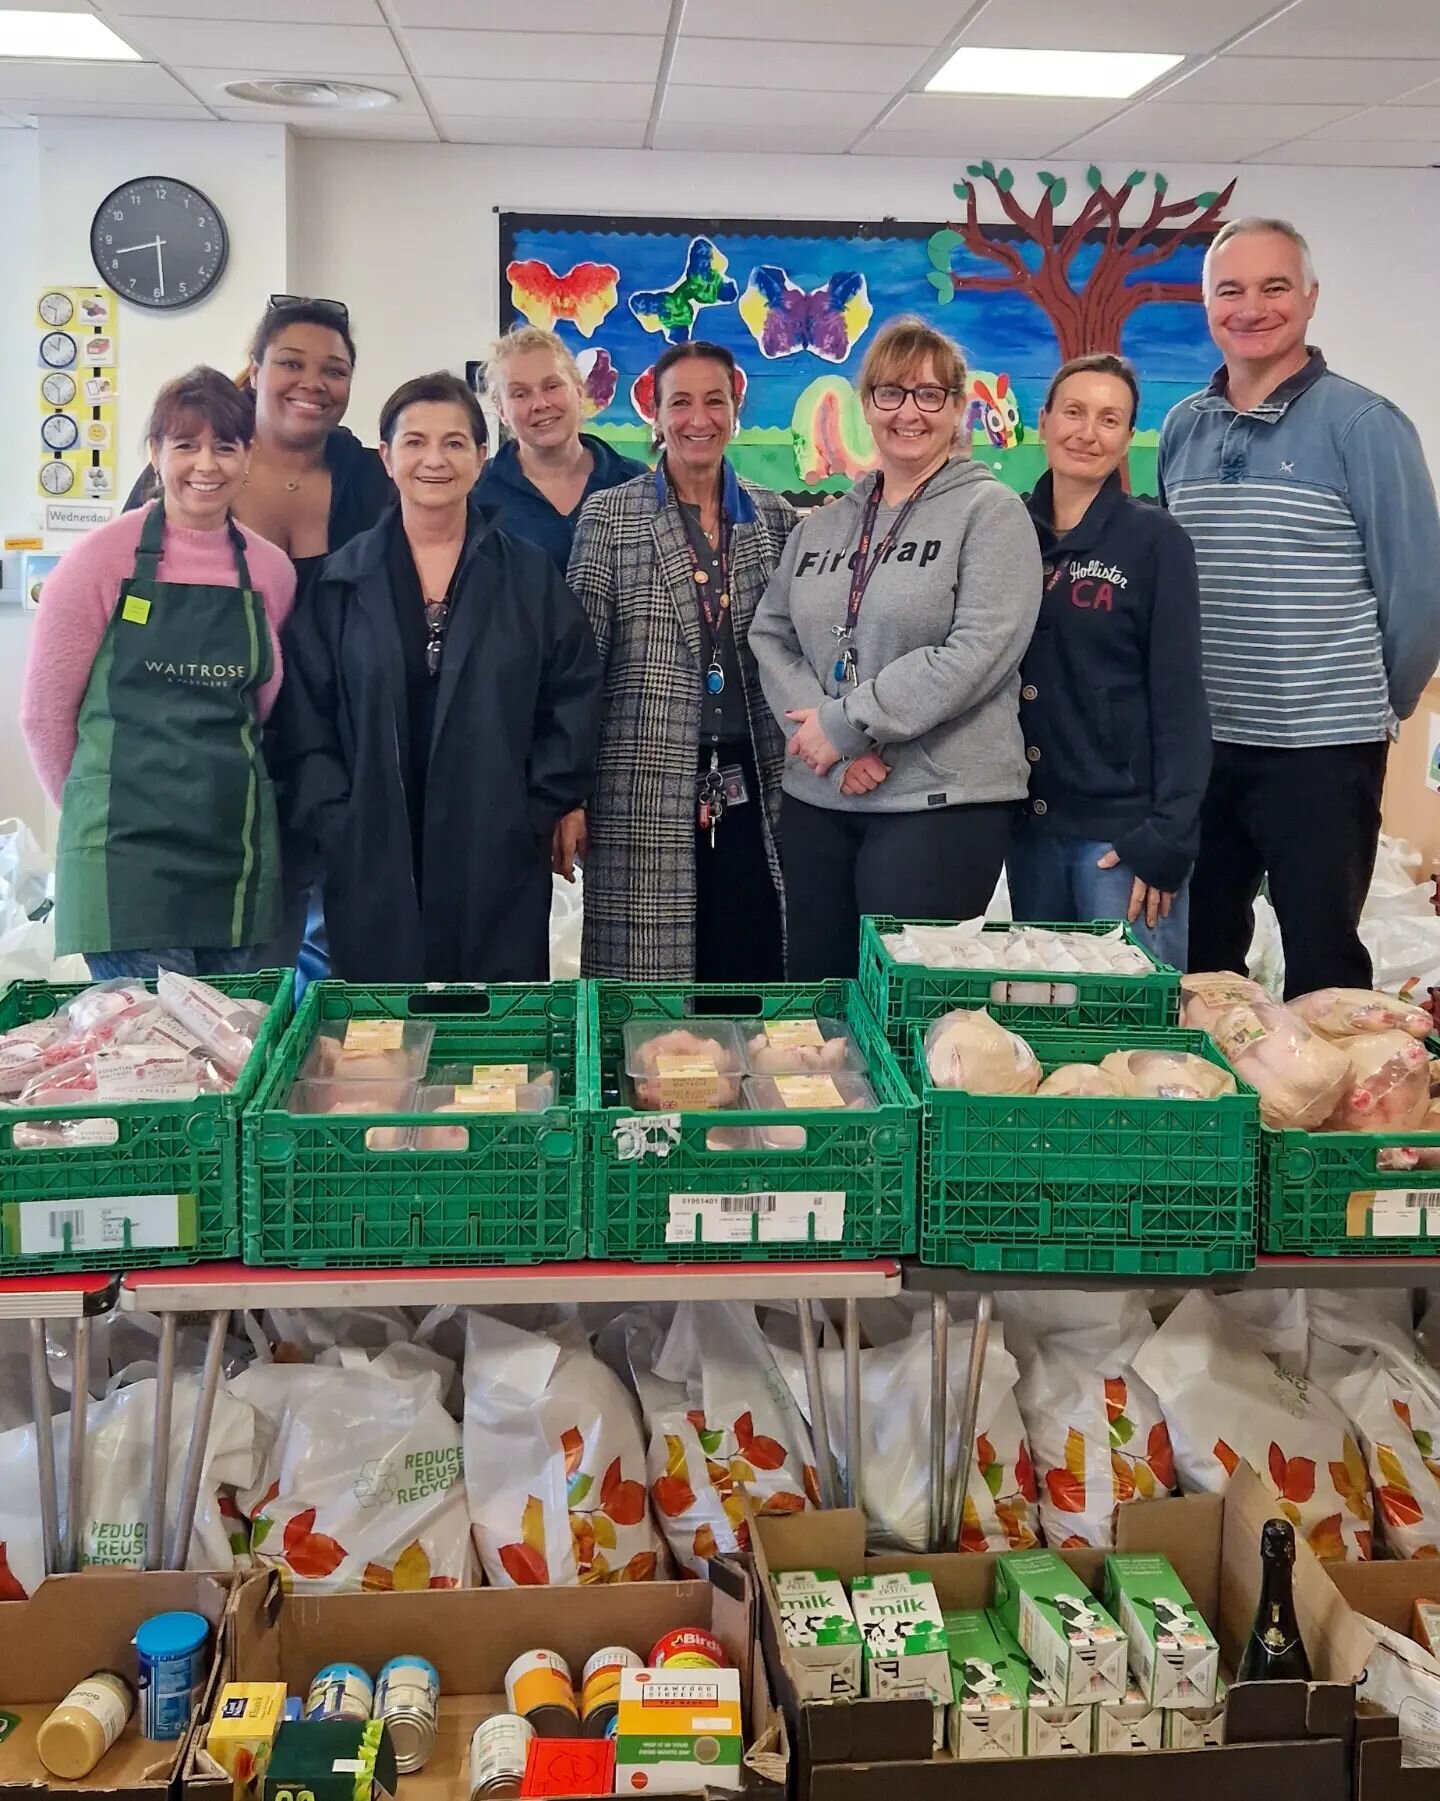 We're grateful for the help at this week's Easter Food Bank from our amazing volunteers and community partners. 💖 Thank you for all your continued support, to Sarah &amp; @waitrose_cobham team, Jim from Squires local fresh fruit &amp; vegetable mark